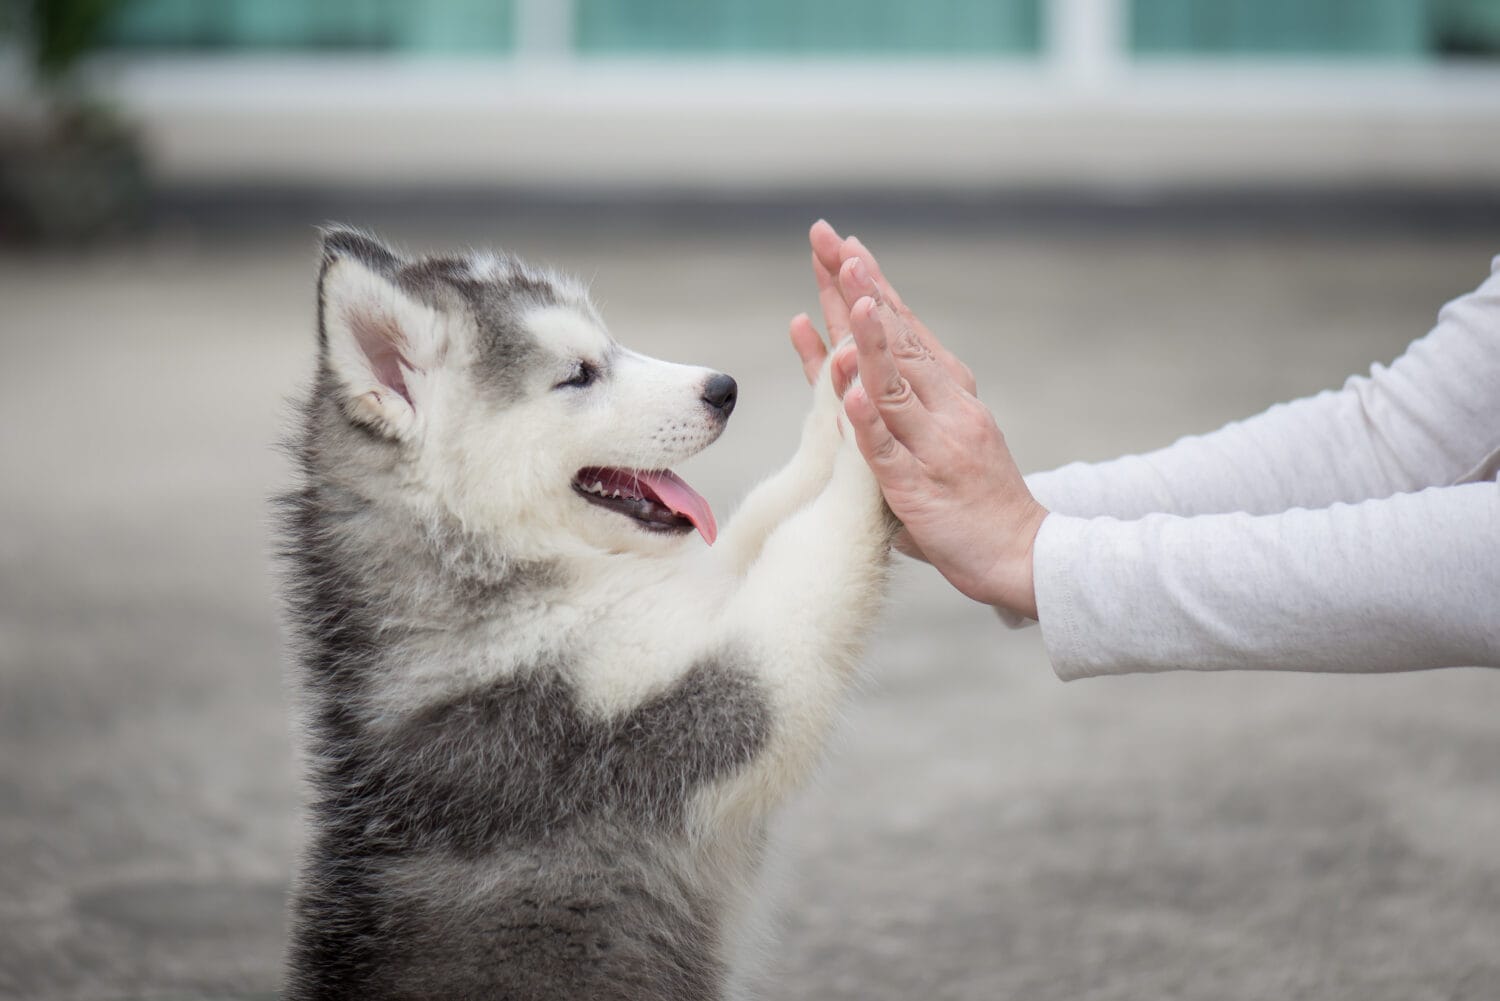 Give me five -Puppy pressing his paw against a Girl hand